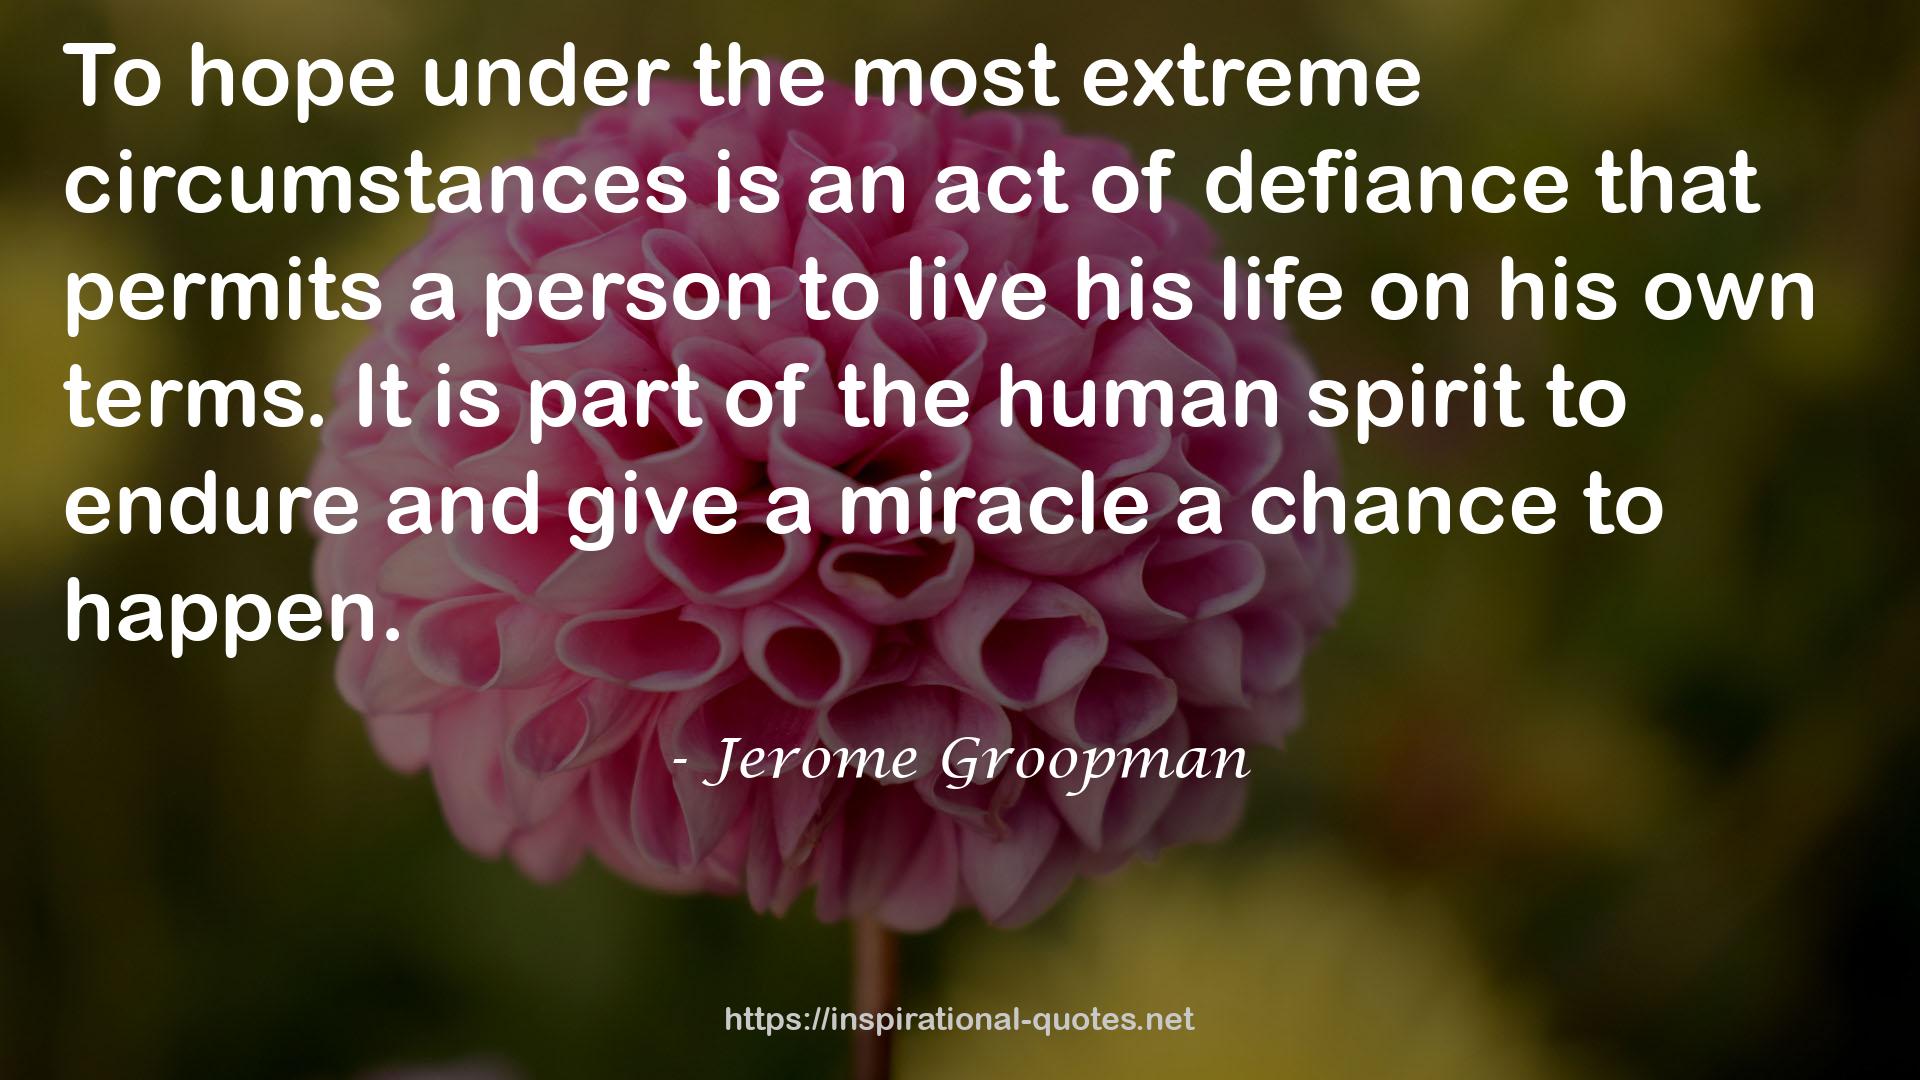 Jerome Groopman QUOTES